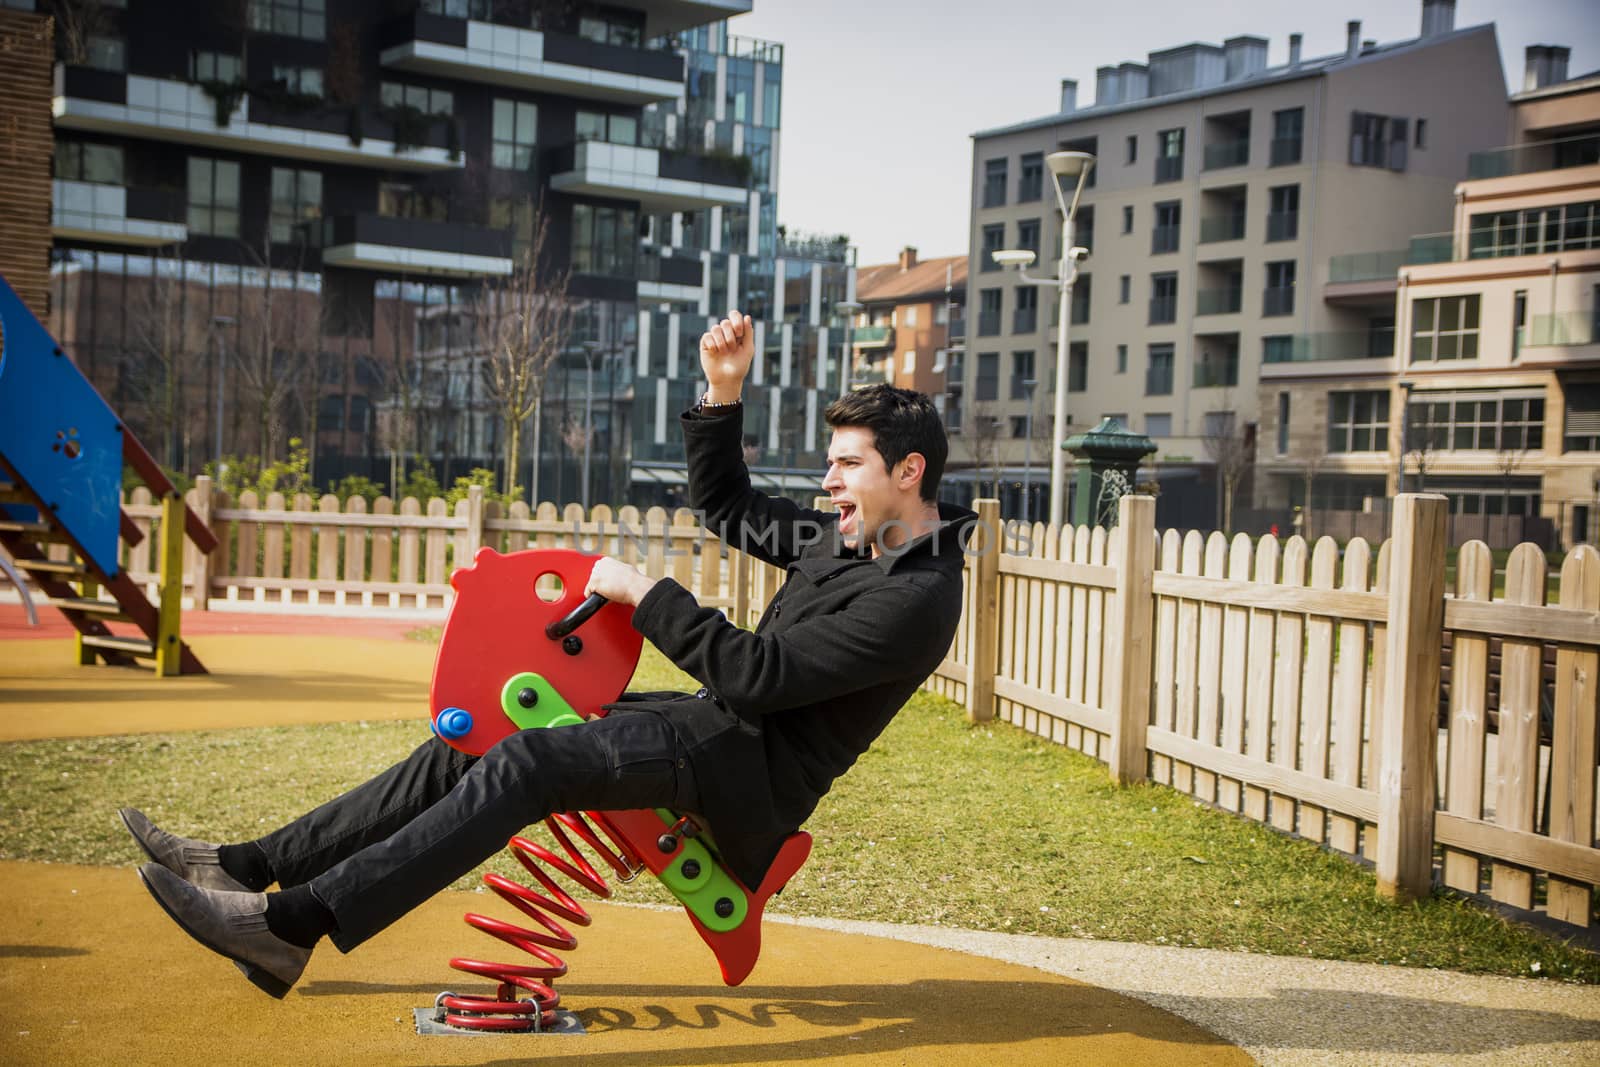 Young man reliving his childhood plying in a children's playground by artofphoto